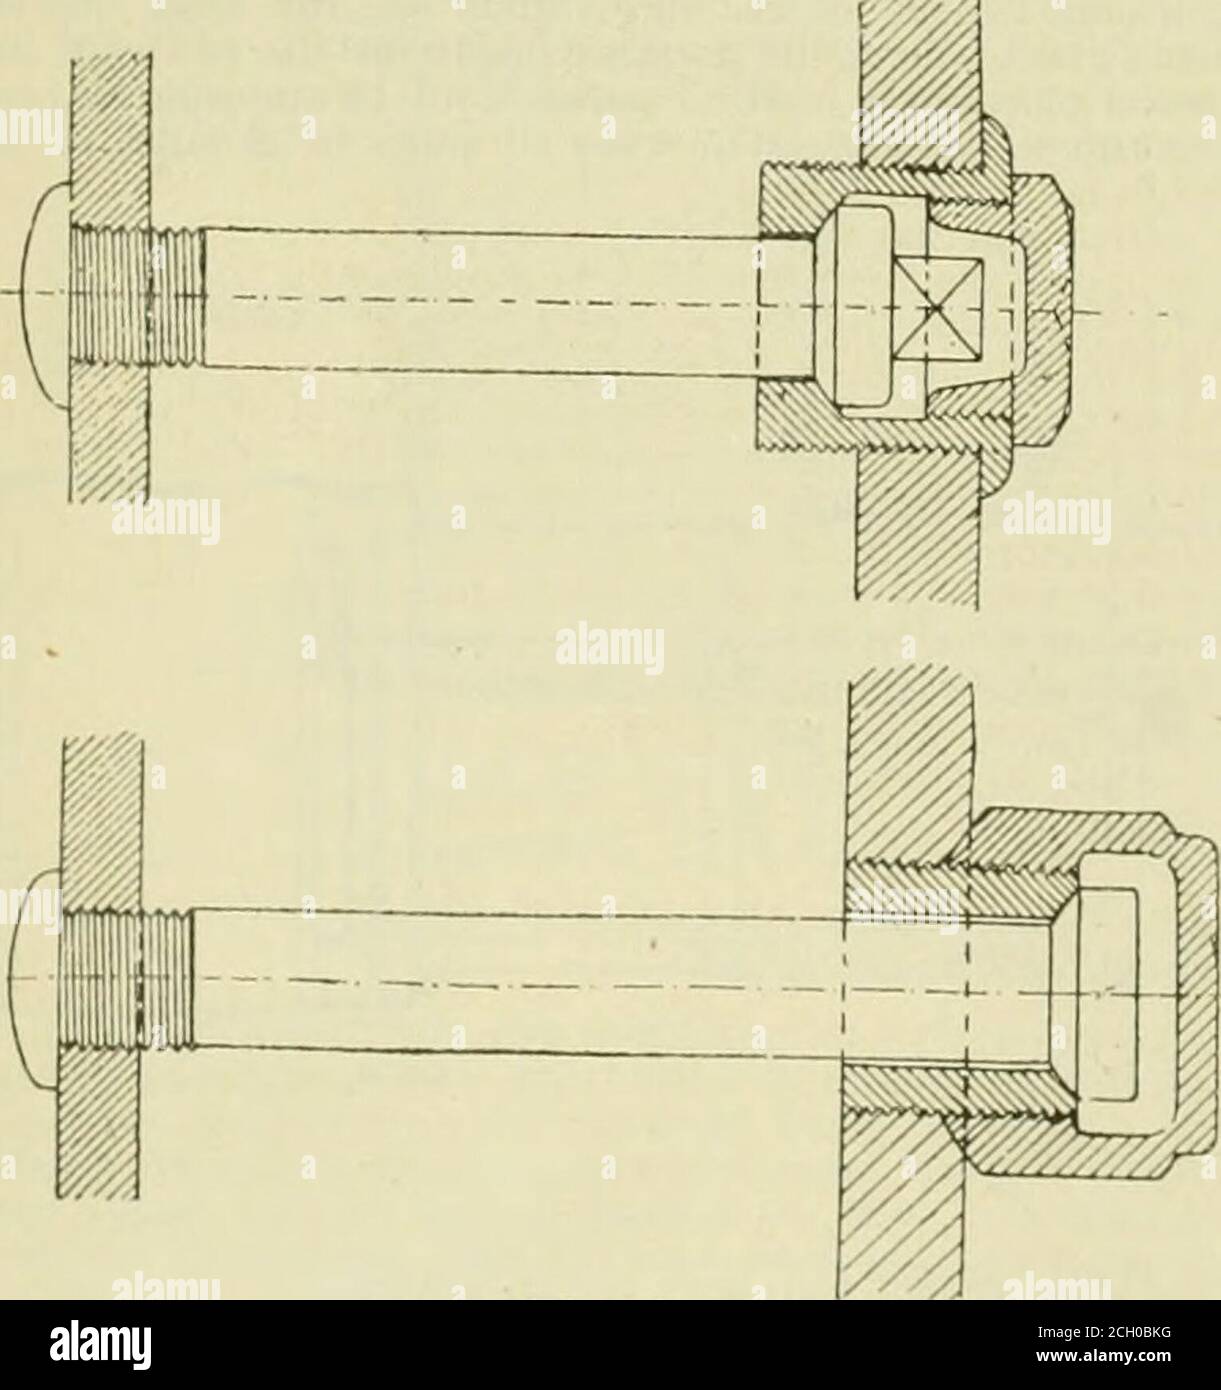 . American engineer and railroad journal . J Si Fig. 5- LOCOMOTIVE BOILER WITH FLEXIBLE TUBE SHEET AND SELF-ADJUSTING STAYBOLTS. For the stay-bolts, ^ X 2.67 X 3 7 = 0.0094 in. fire-box, „/„ x 88.3 X 7 2 = 0.6089 tubes, jfa X 153.55 X 5.2 = 0.4675 Total 1.0858 The temperature of the outer shell is practically within 5per cent, of the temperature of the water, which in this caseamounts to 351$°, and we calculate the expansion of the oulershell therefrom as -rfYff X 244.52 X 3.515 = .5025 in. The expansion of the inner portion is therefore .5835 ingreater than the ouler. But the latter will also Stock Photo